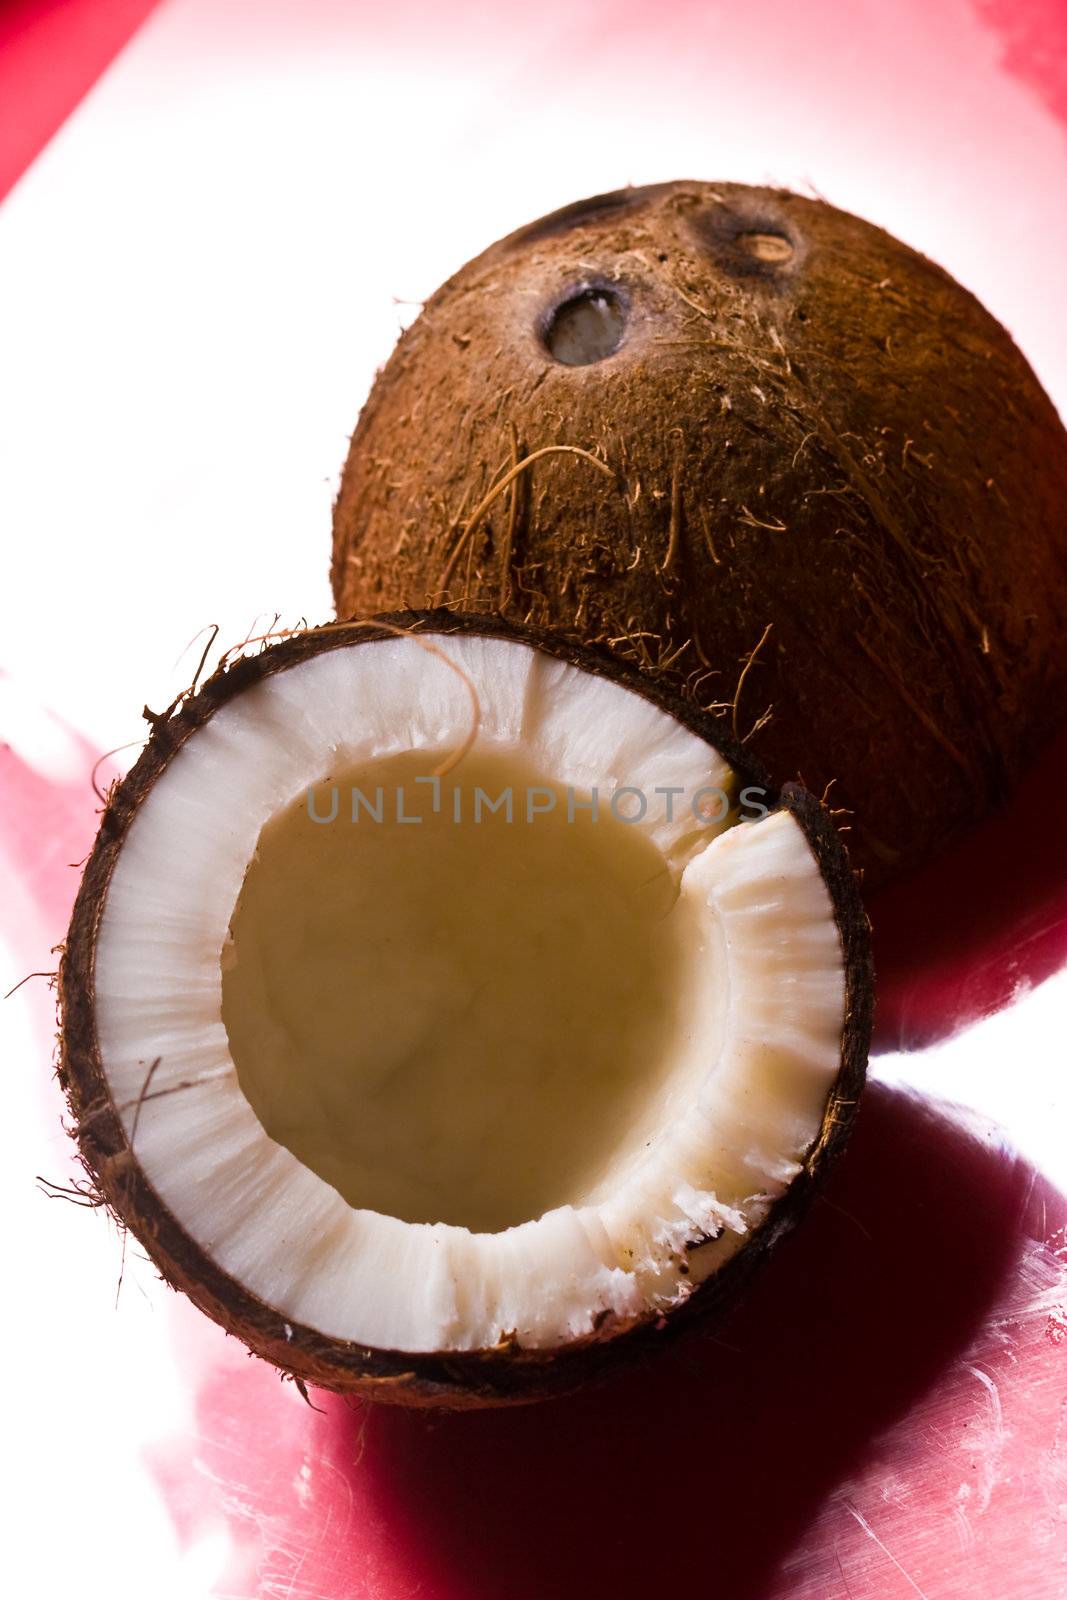 exotic fruit series: whole and broken coconut